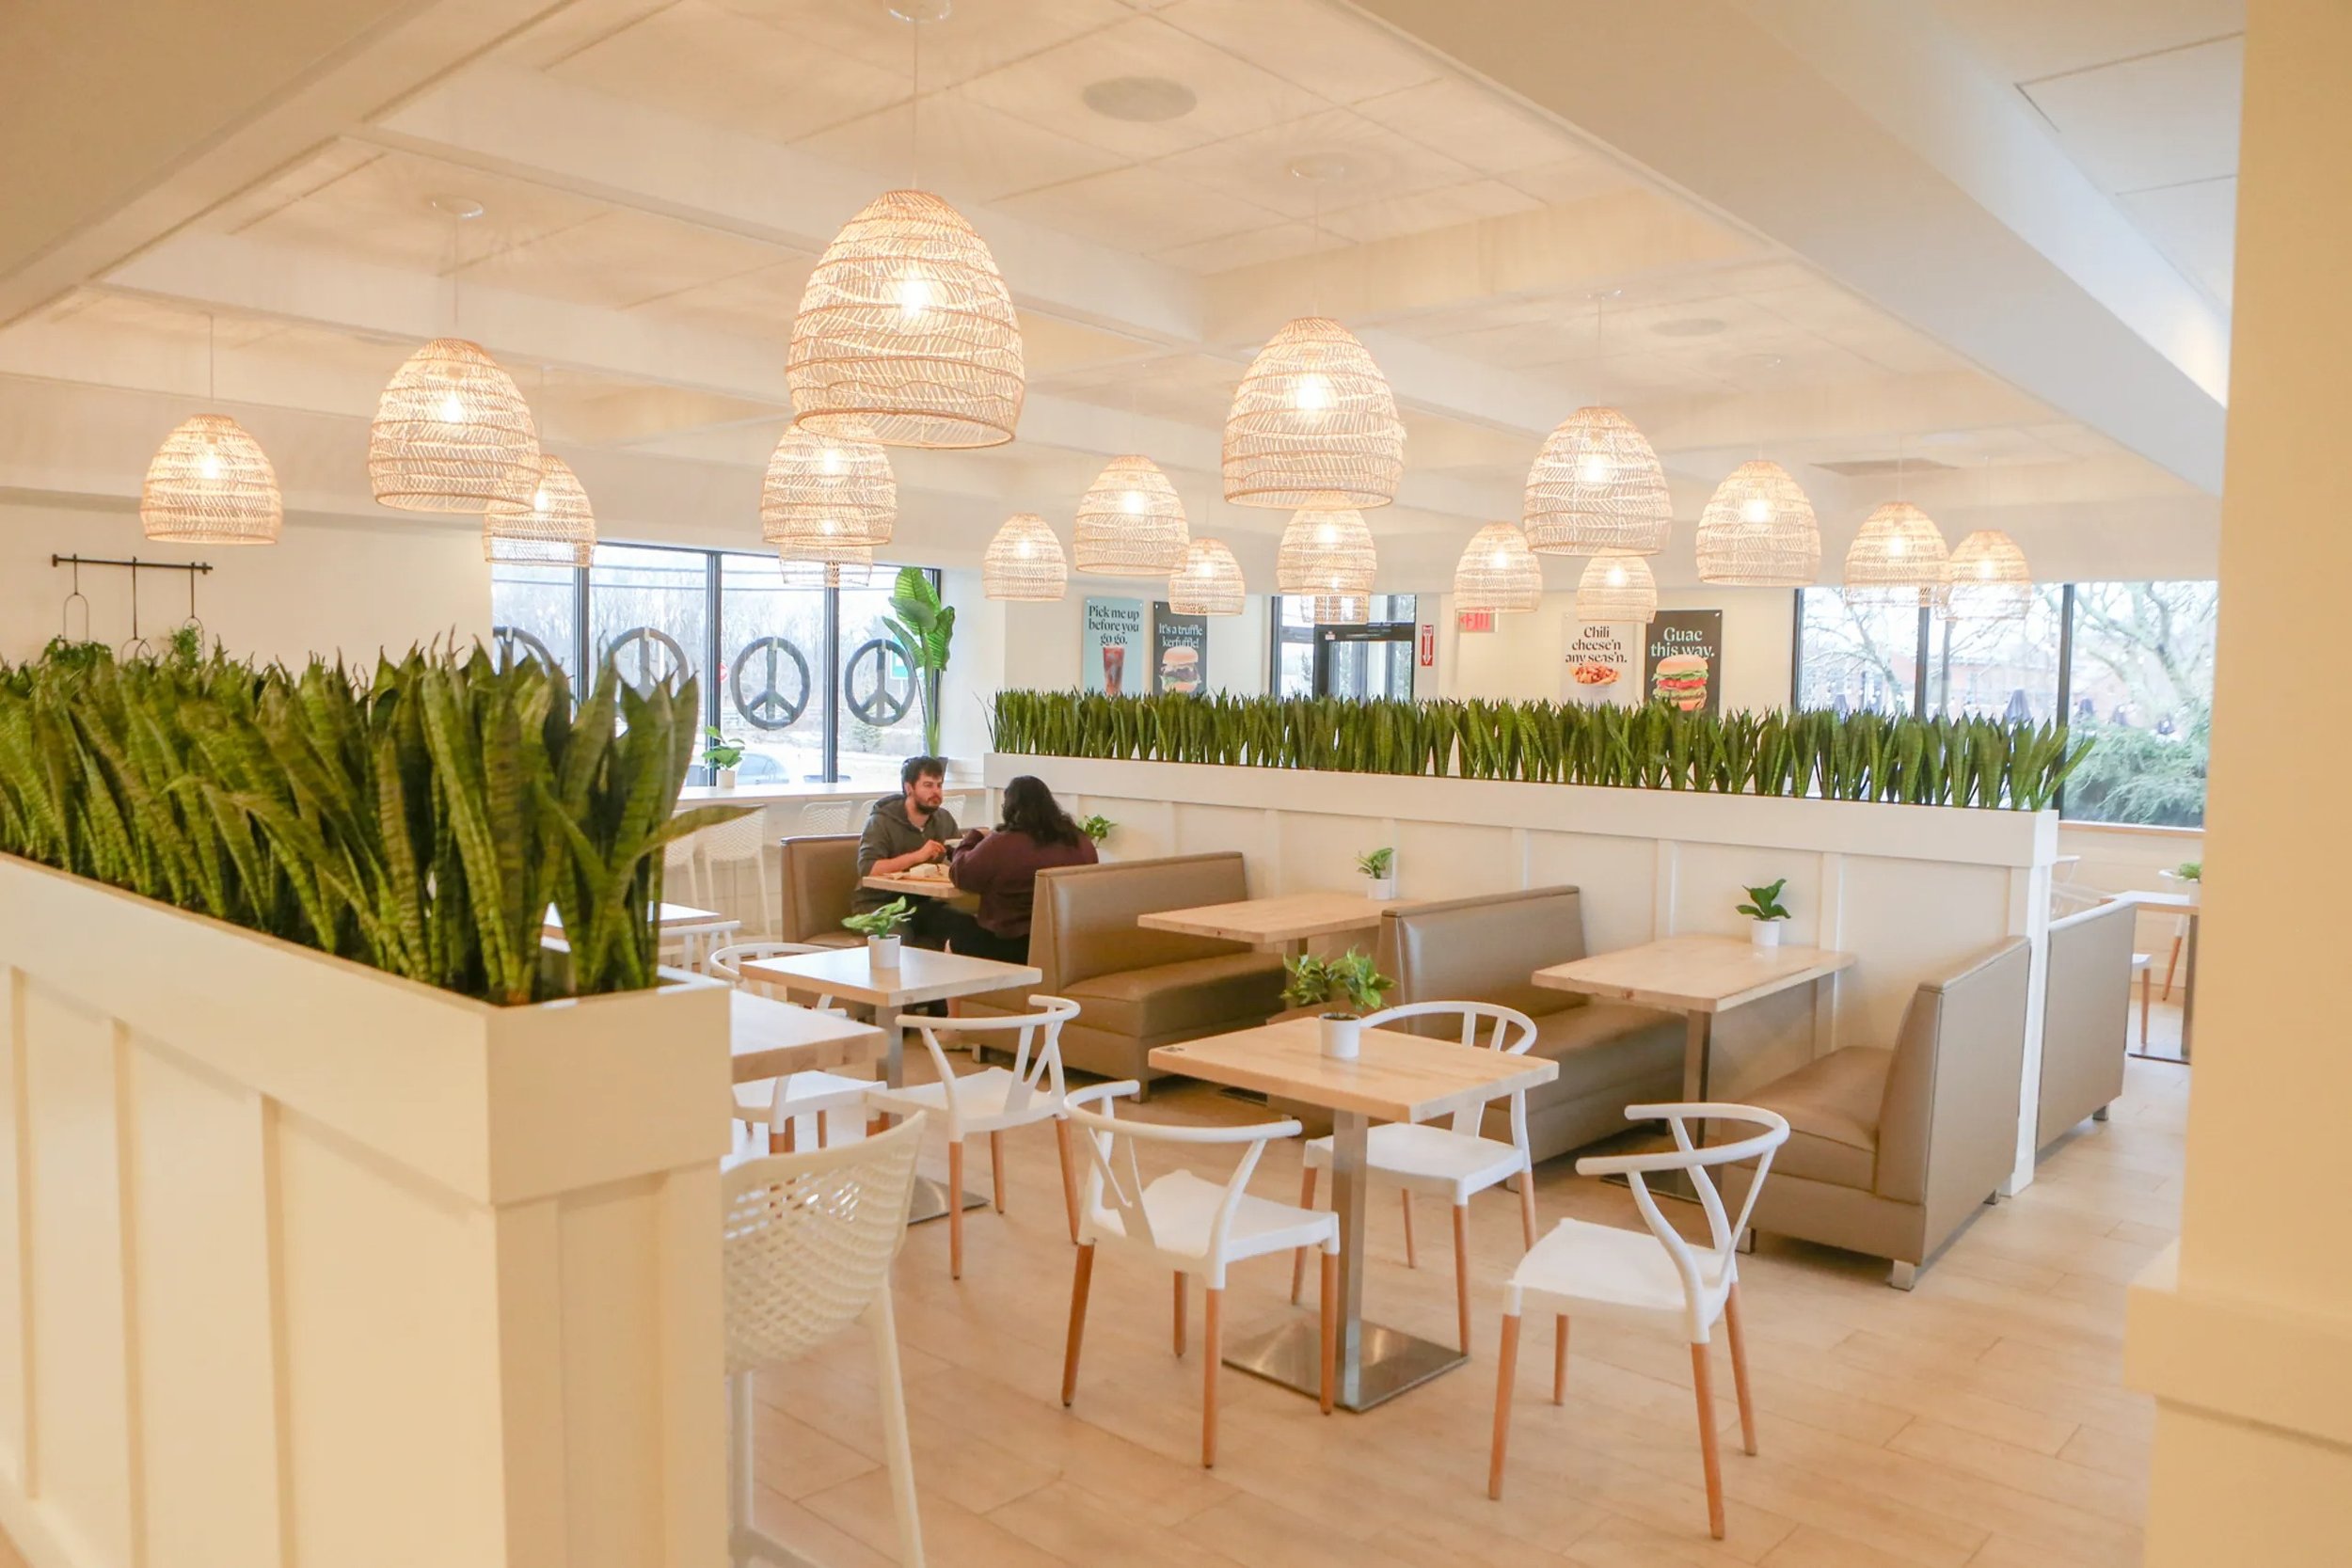  Plant City X's remodeling of former Burger King location in Warwick has created an airy dining room. Photo credit David DelPoio, The Providence Journal 